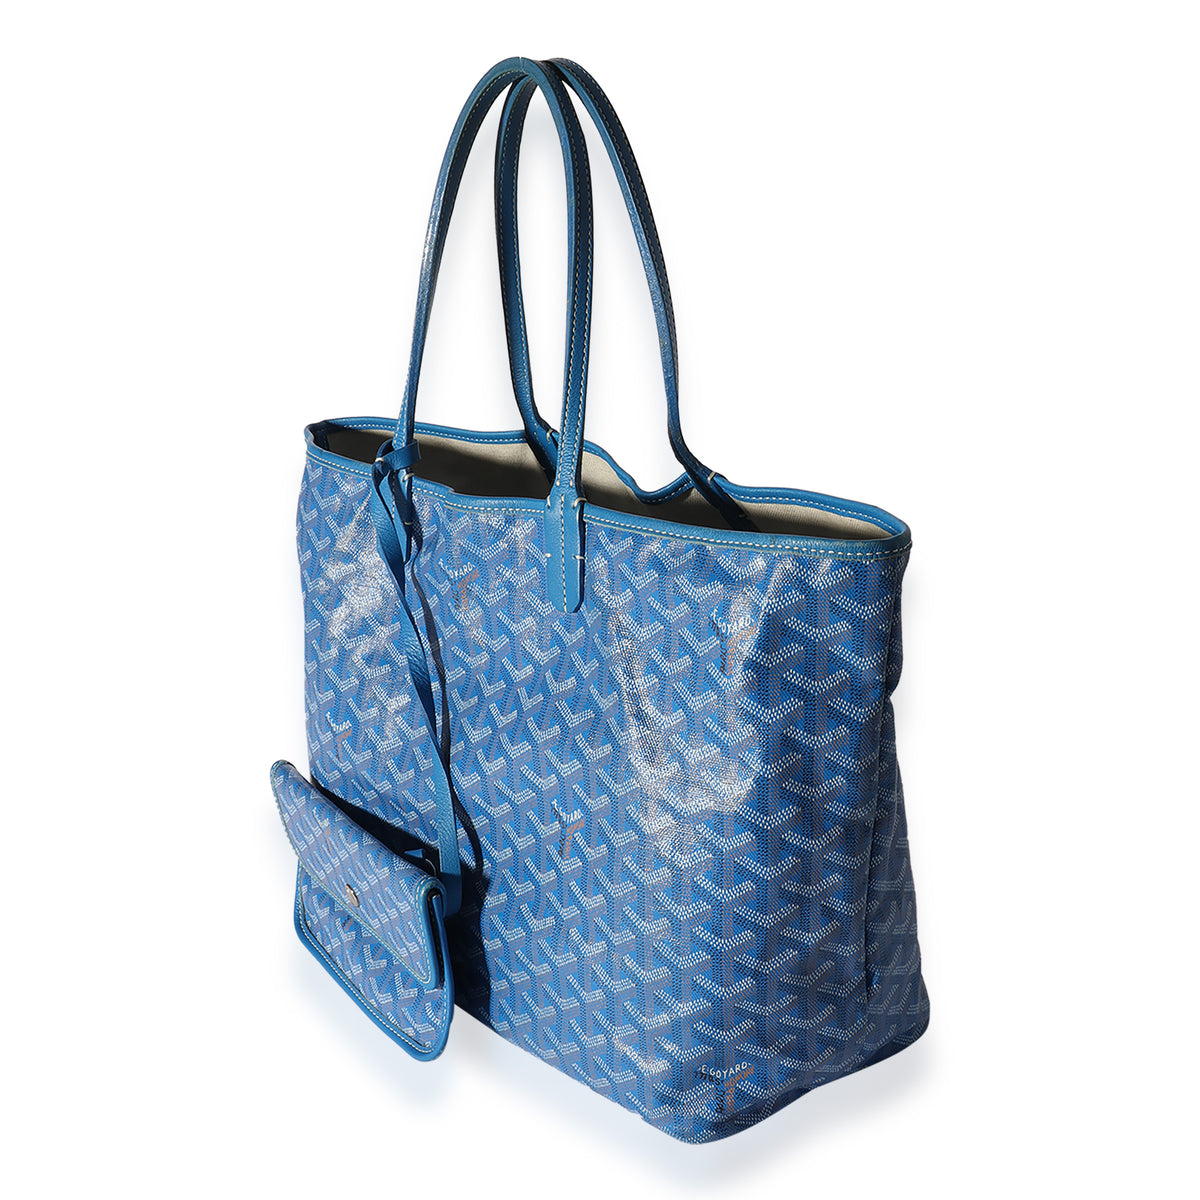 Goyard saint louis pm blue new authentic tote purchased from japan